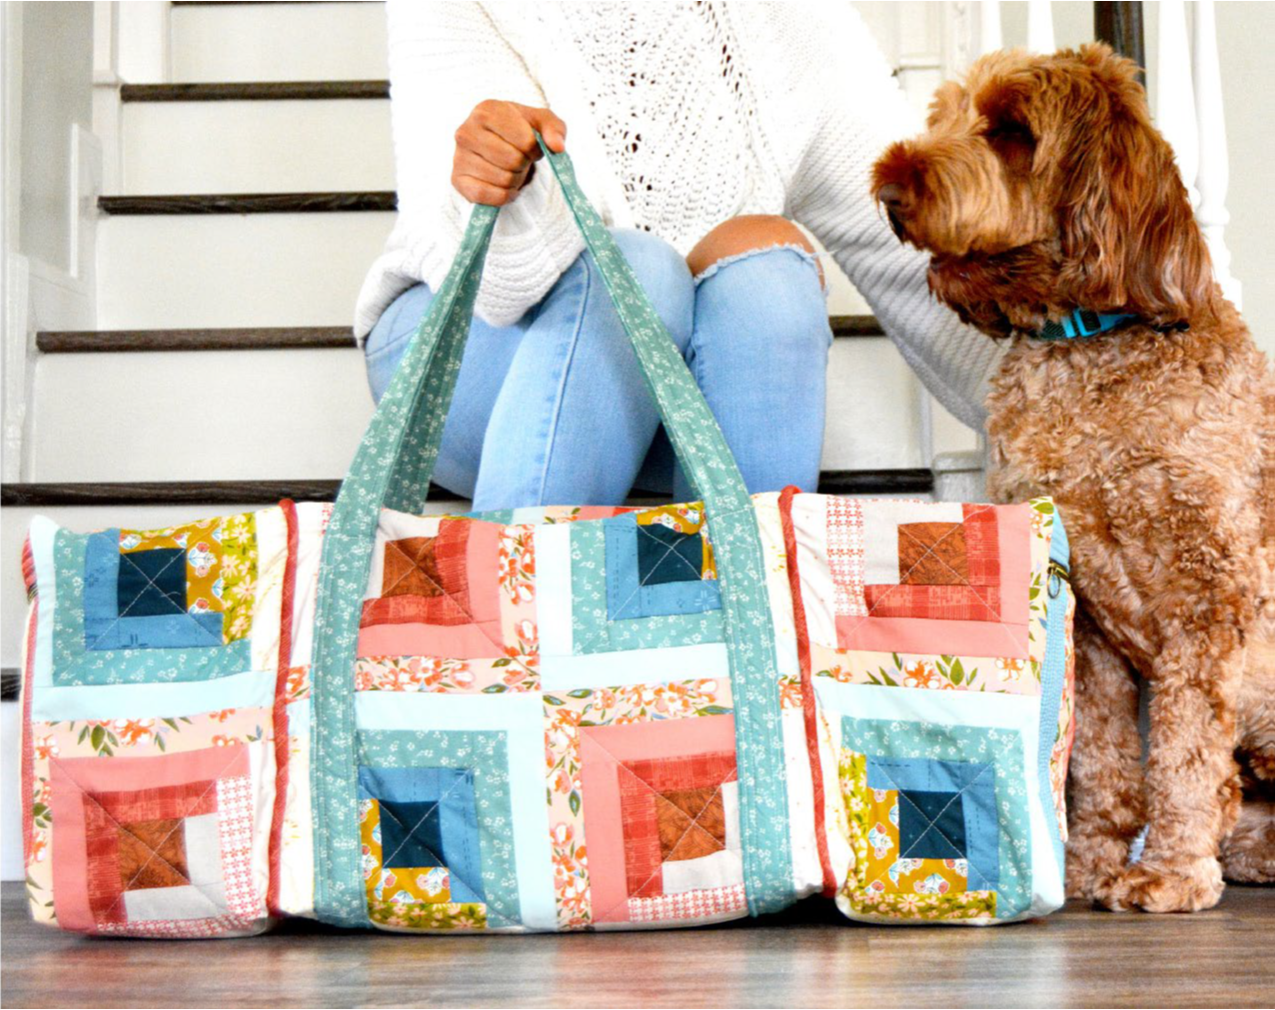 Liana Bowler bag sewing pattern for Sew Hungryhippie | SewHungryhippie